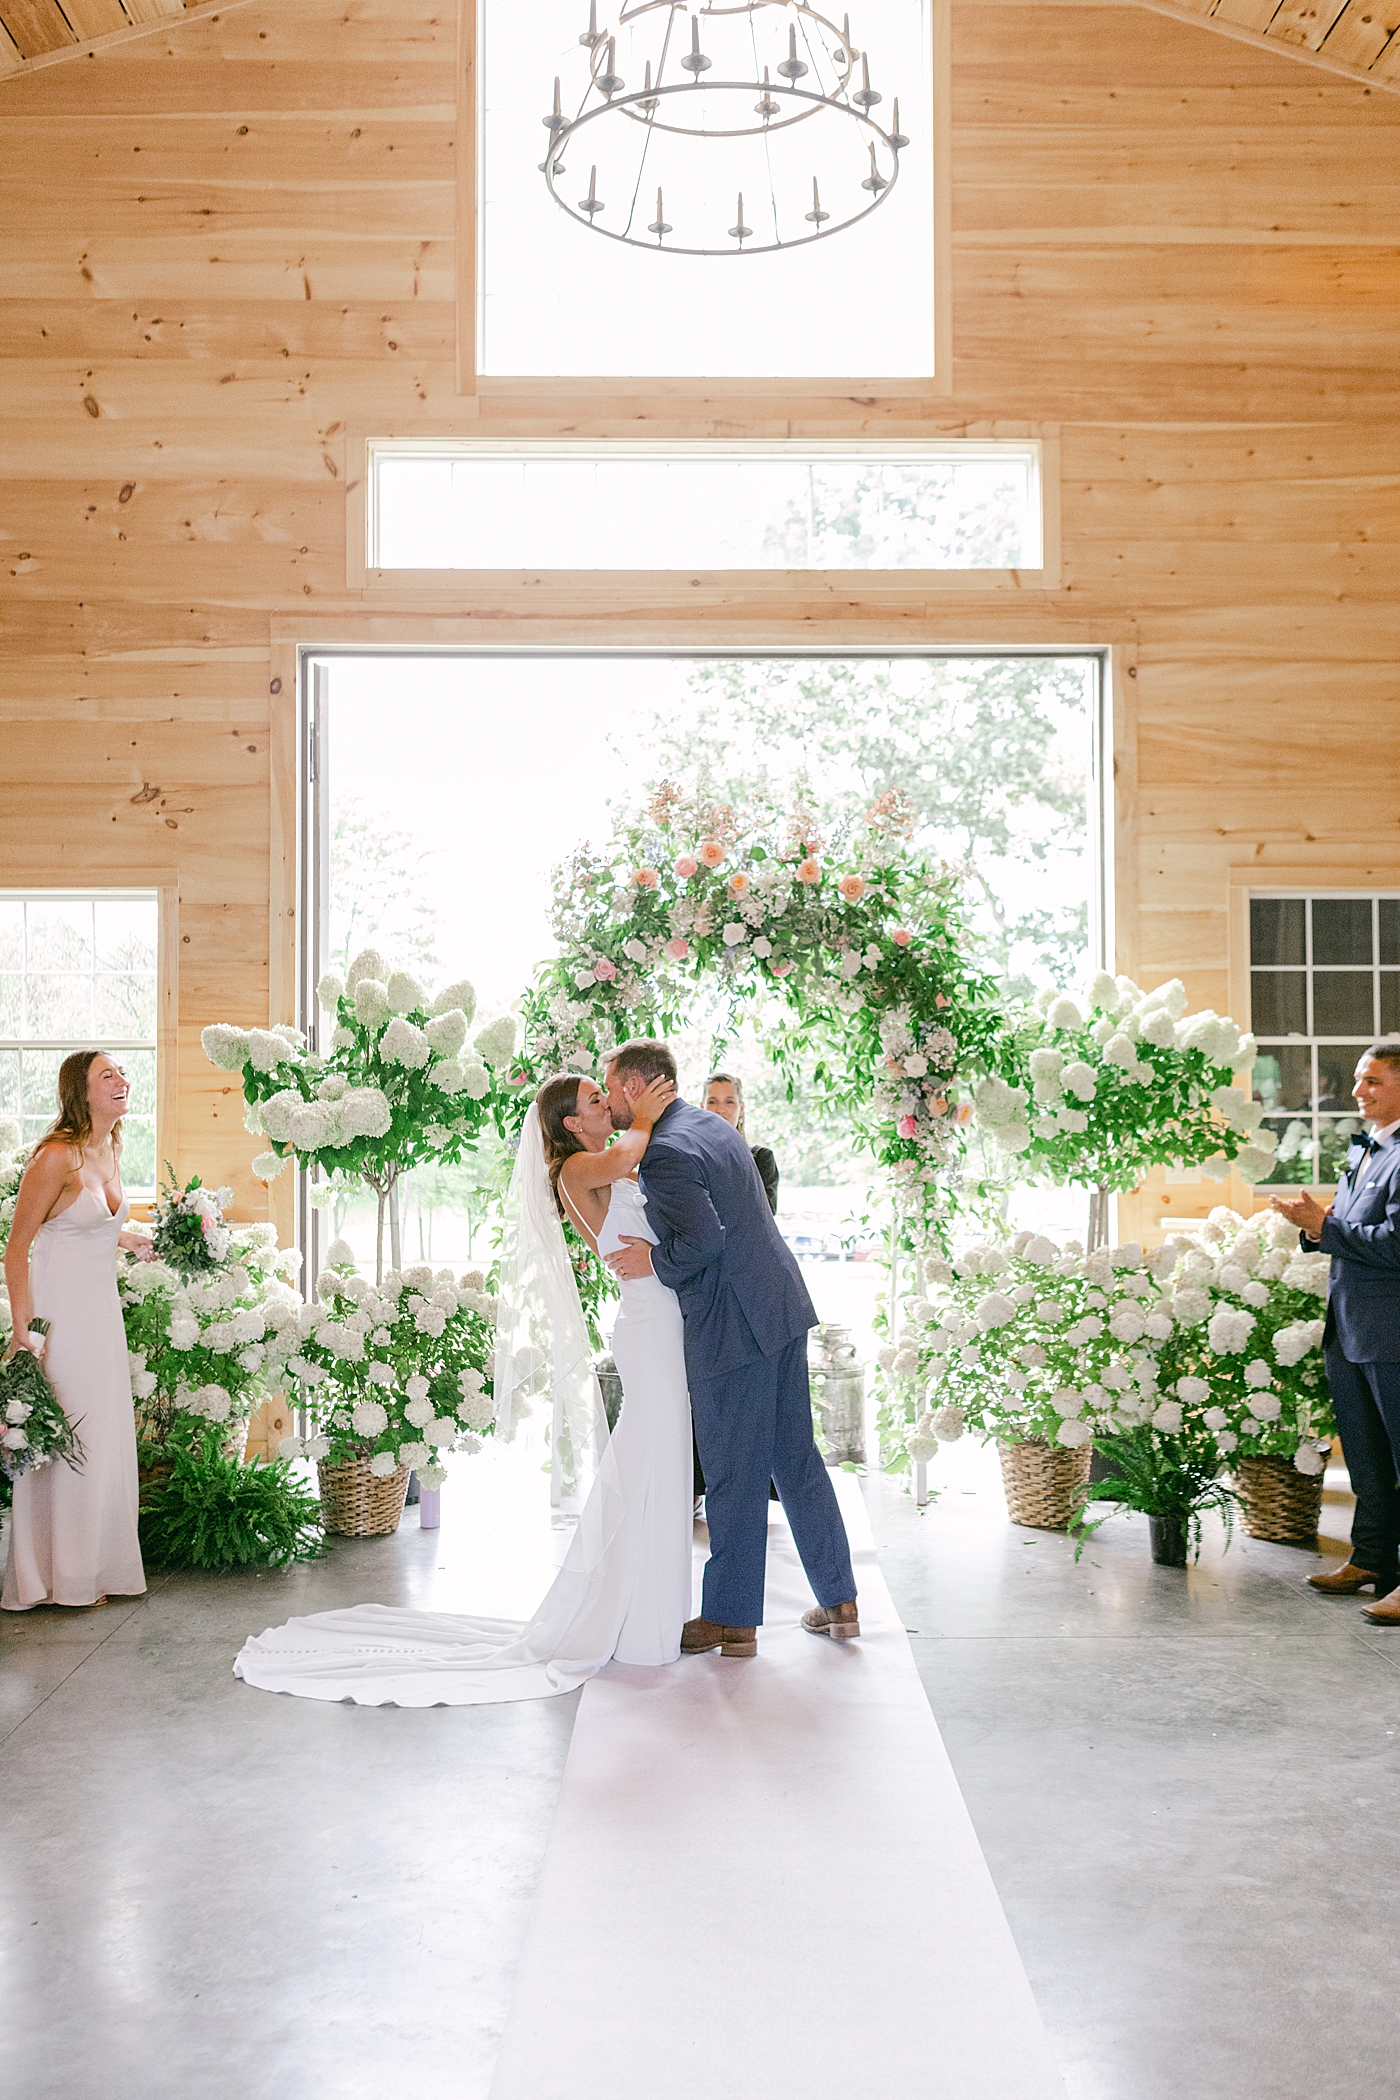 Bride and groom first kiss | Image by Hudson Valley Wedding Photographer Hope Helmuth